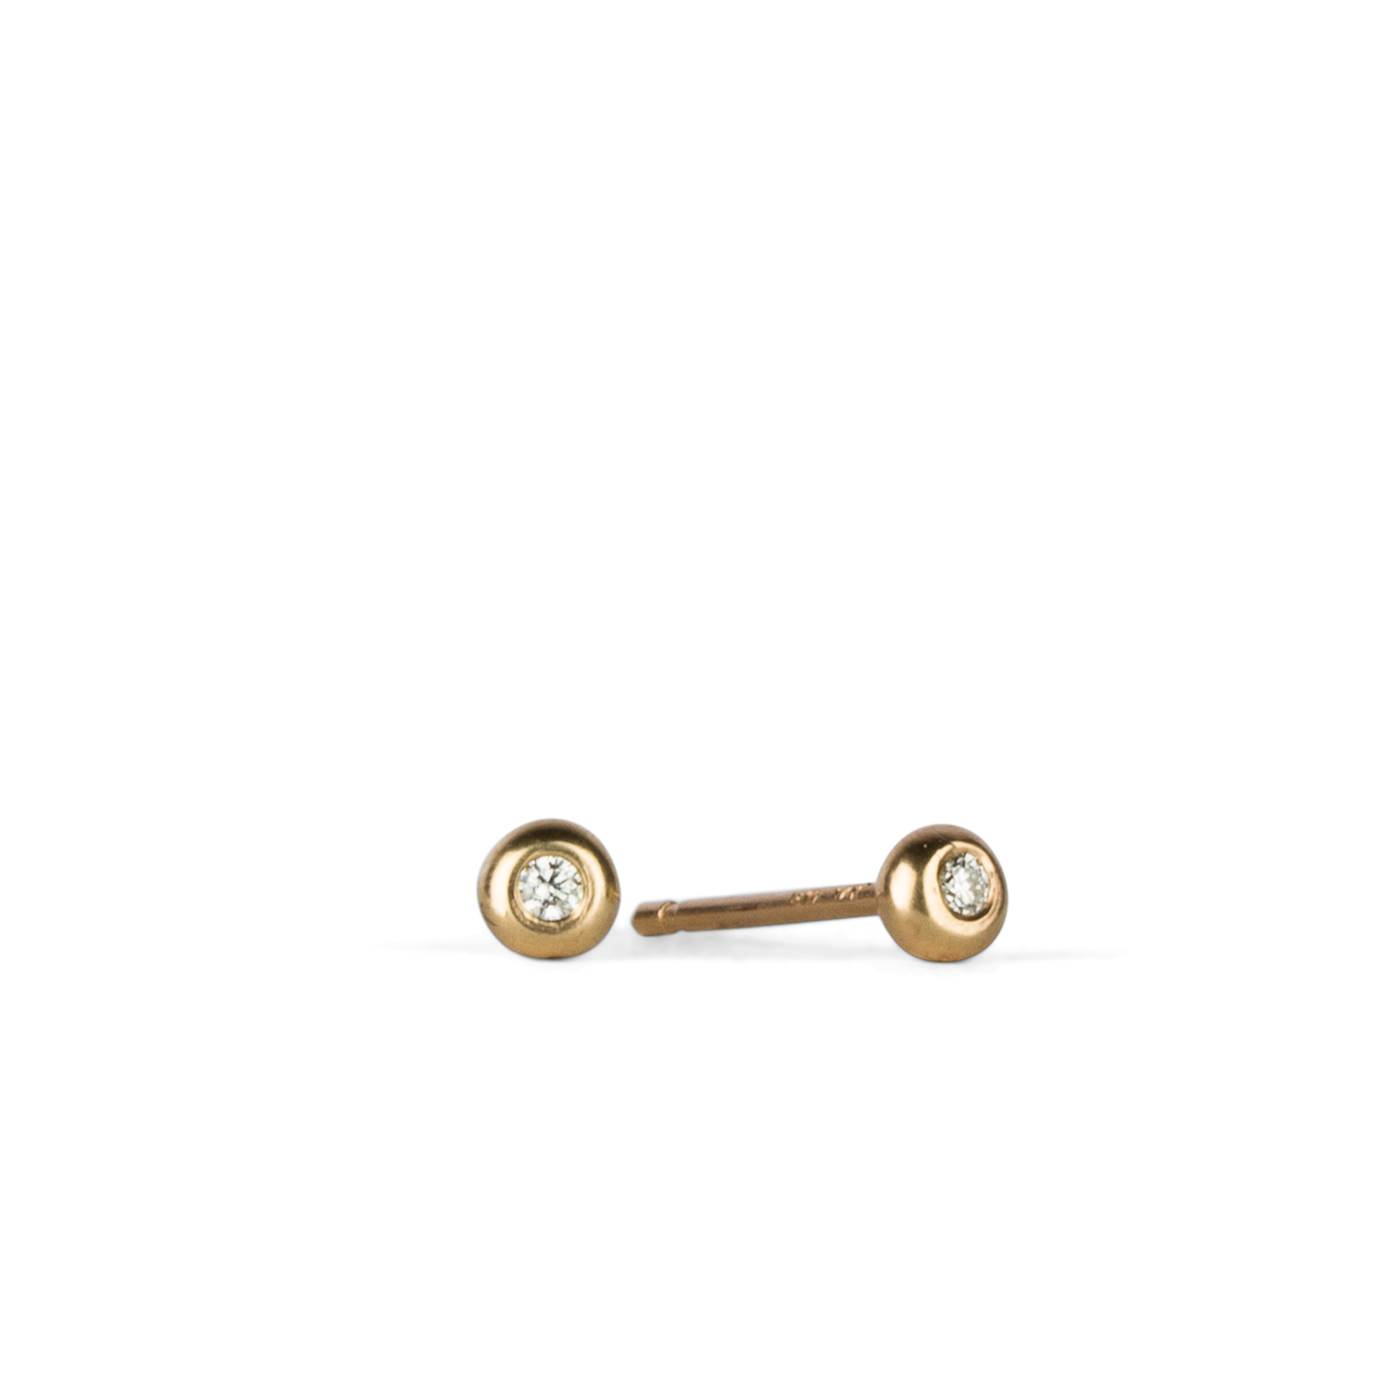 Yellow Gold Diamond Droplet Studs by Corey Egan side view on a white background